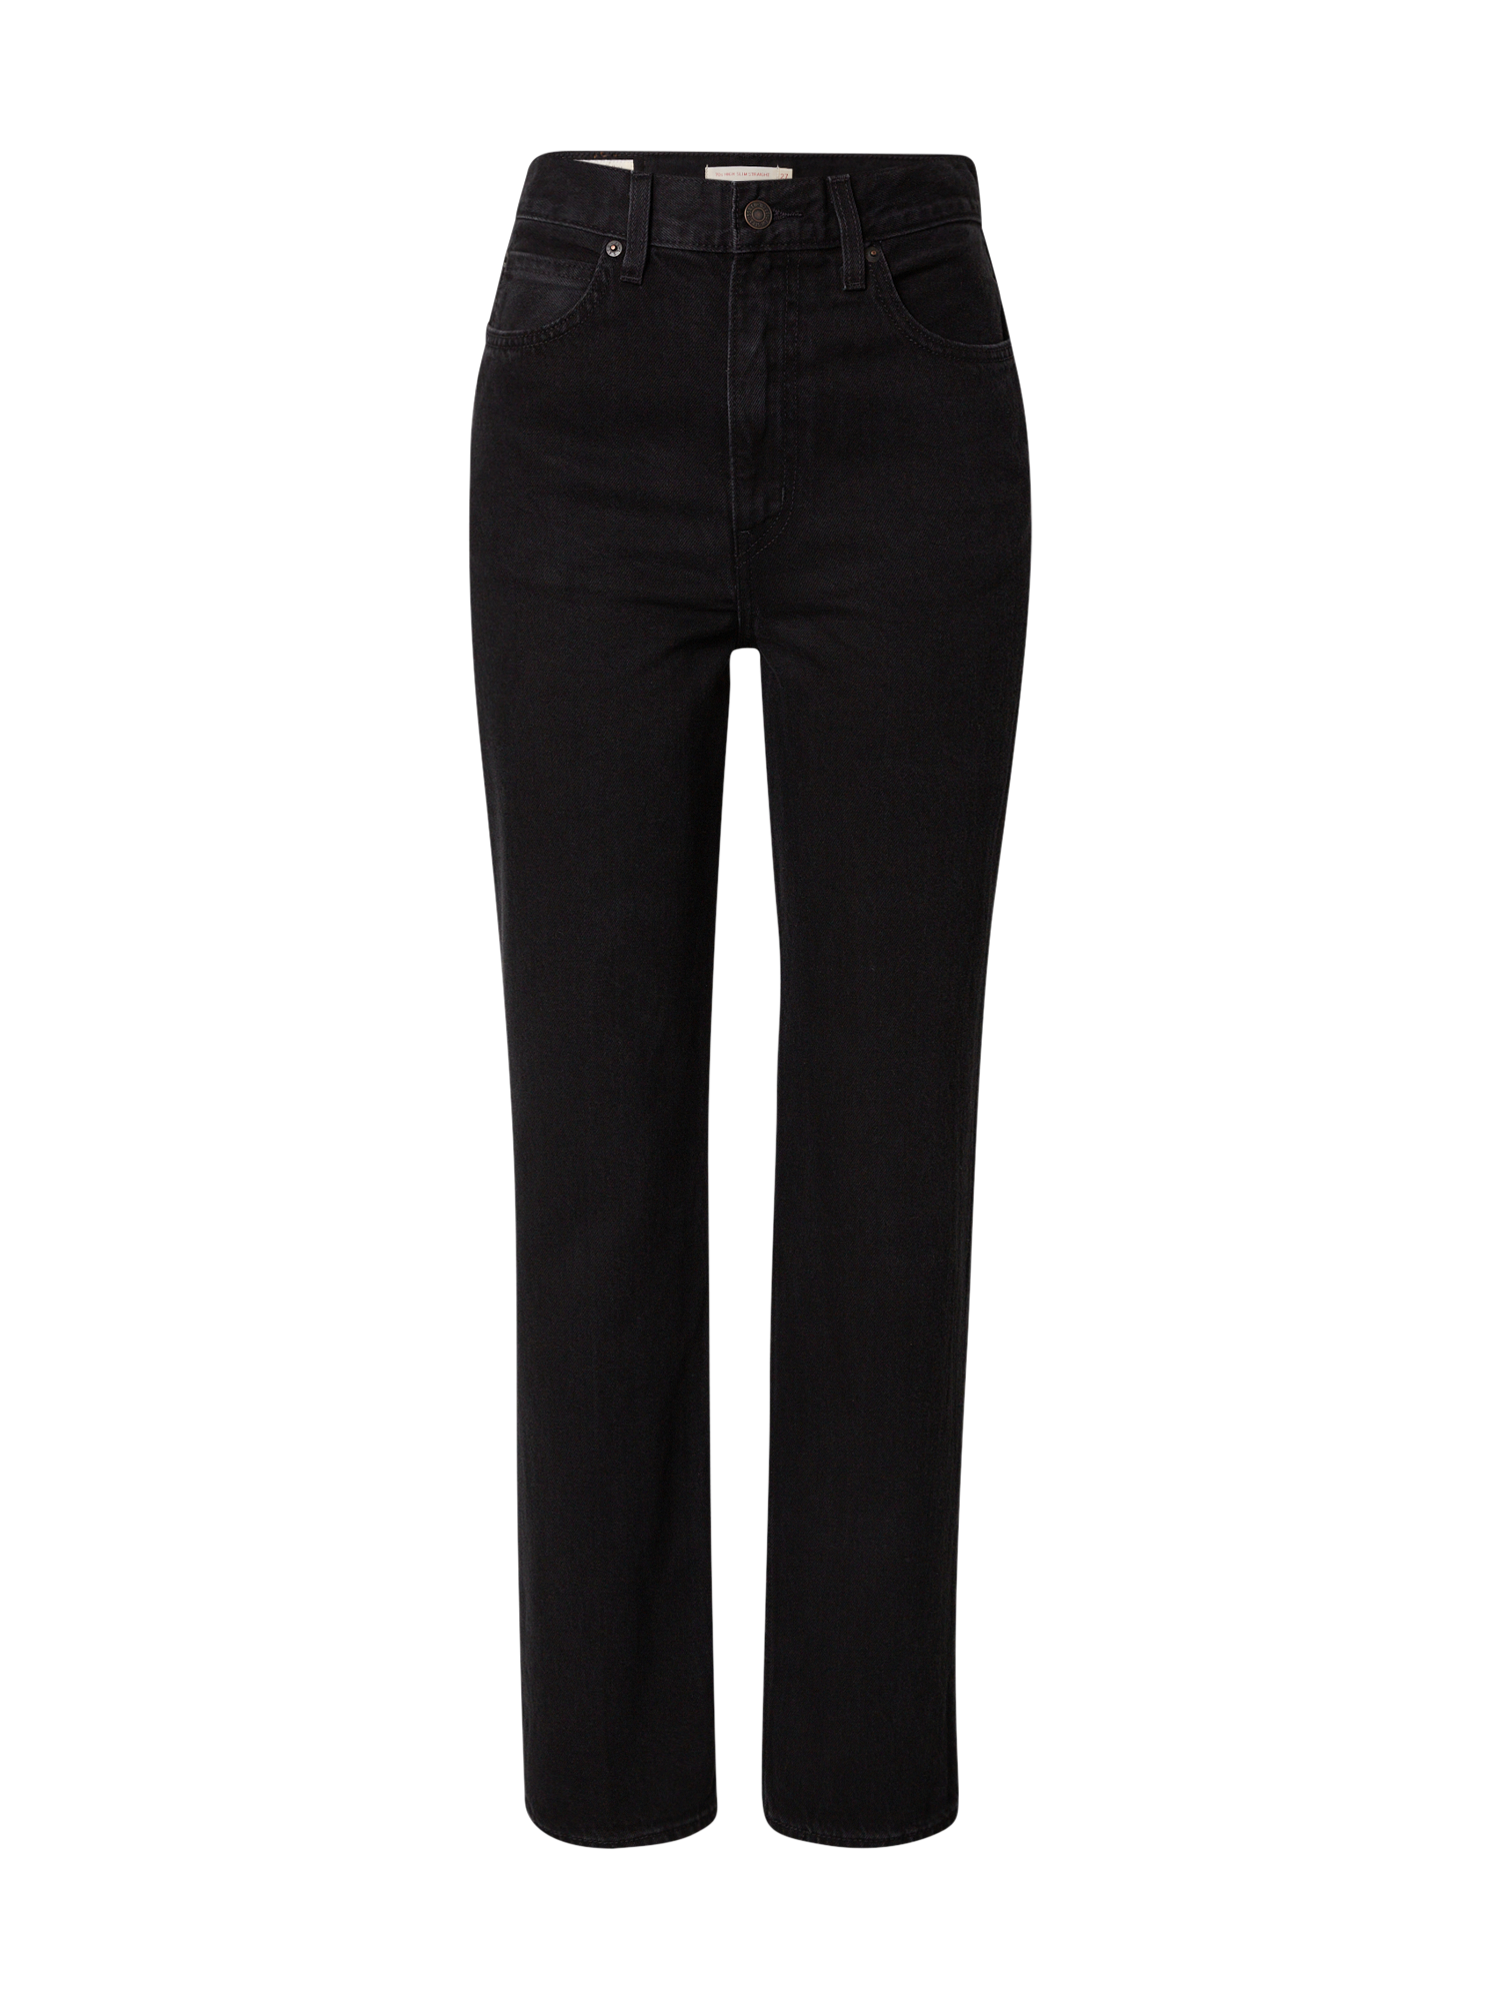 LEVIS Jeans in Nero 